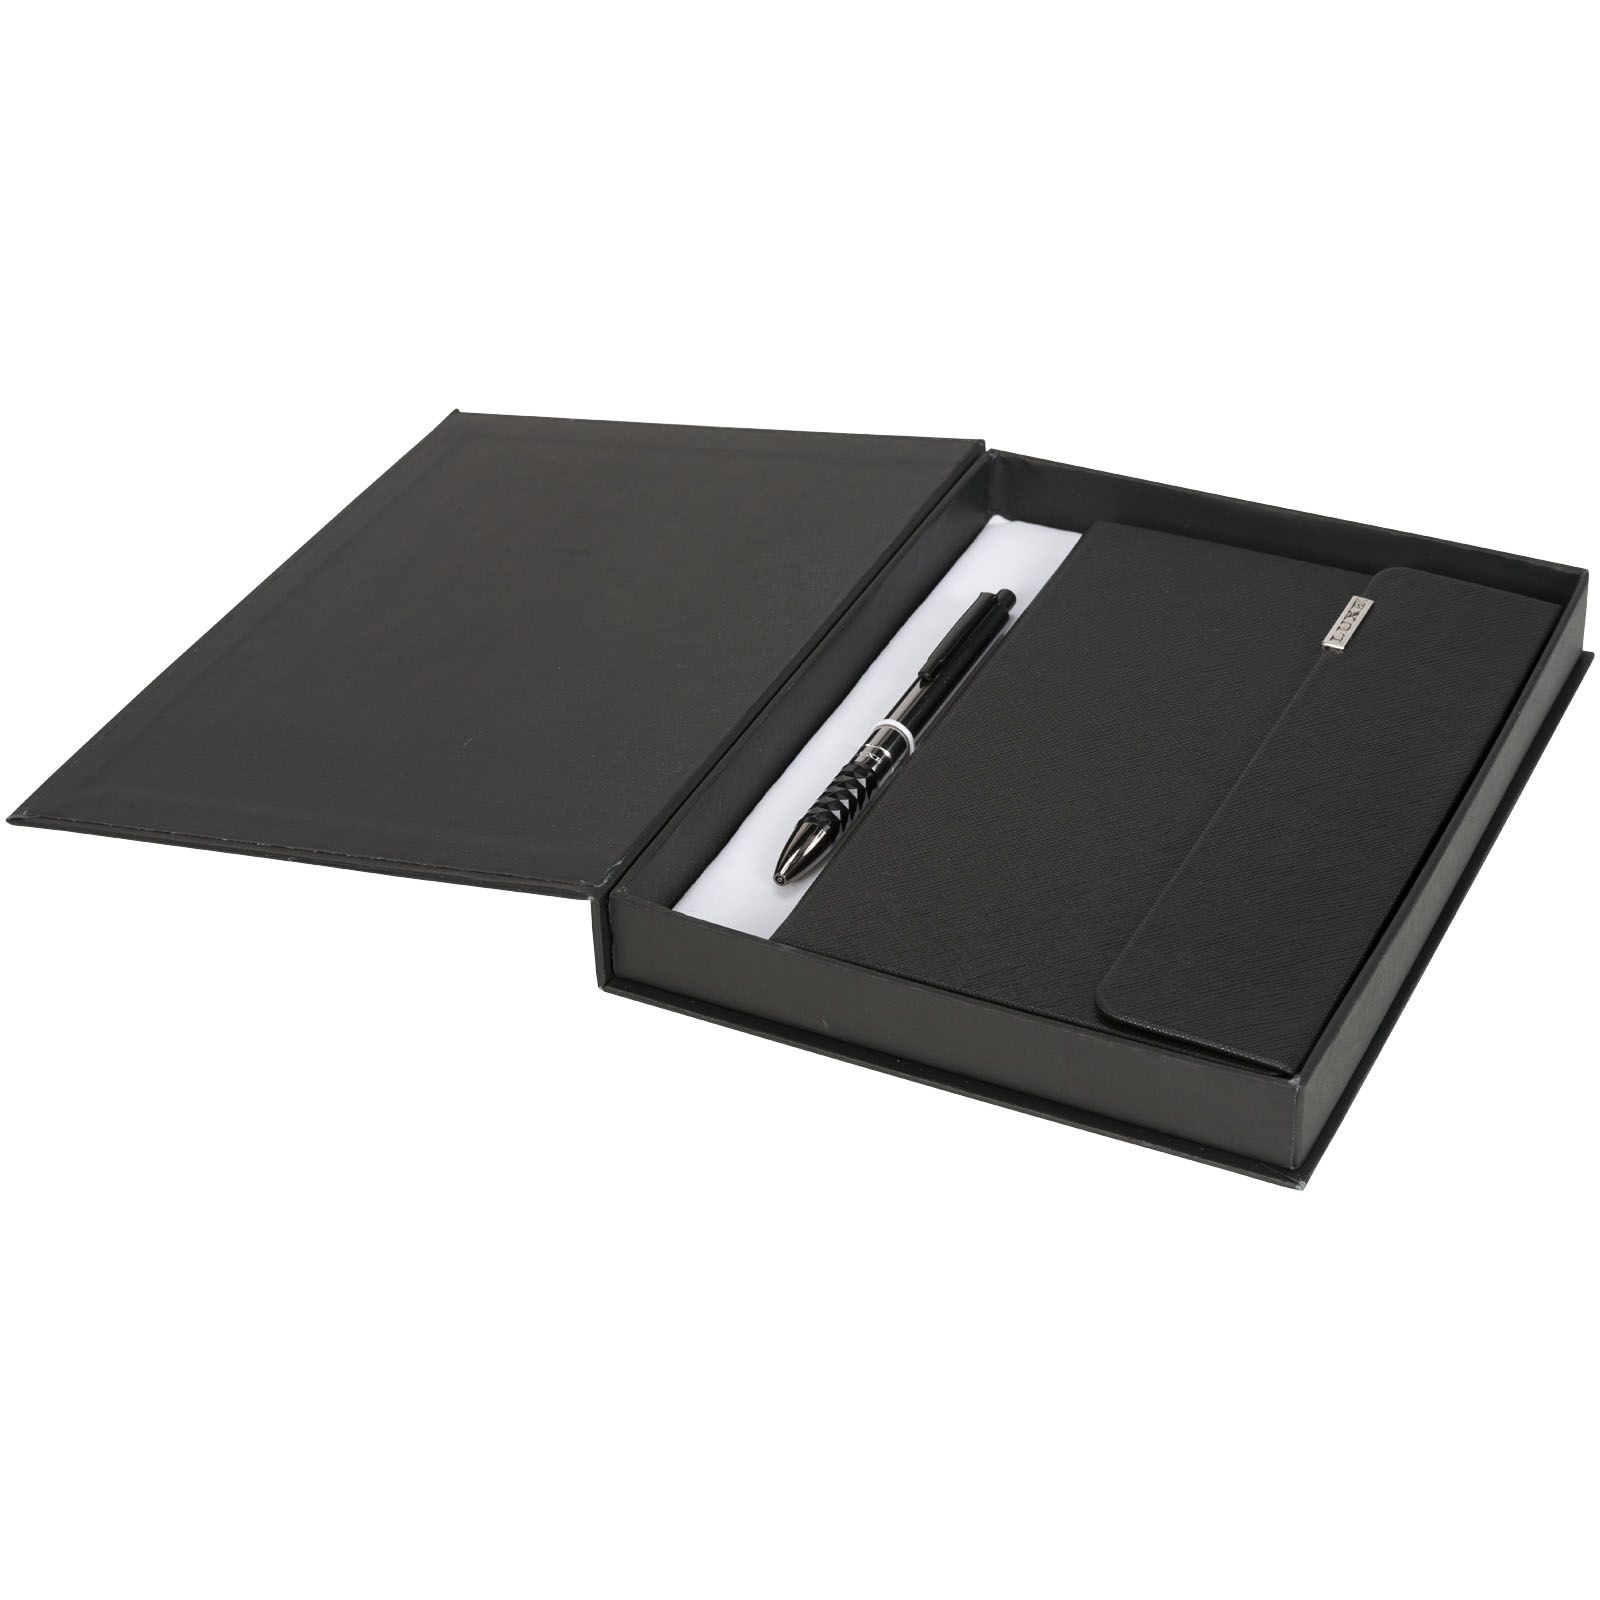 Advertising Gift sets - Tactical notebook gift set - 0